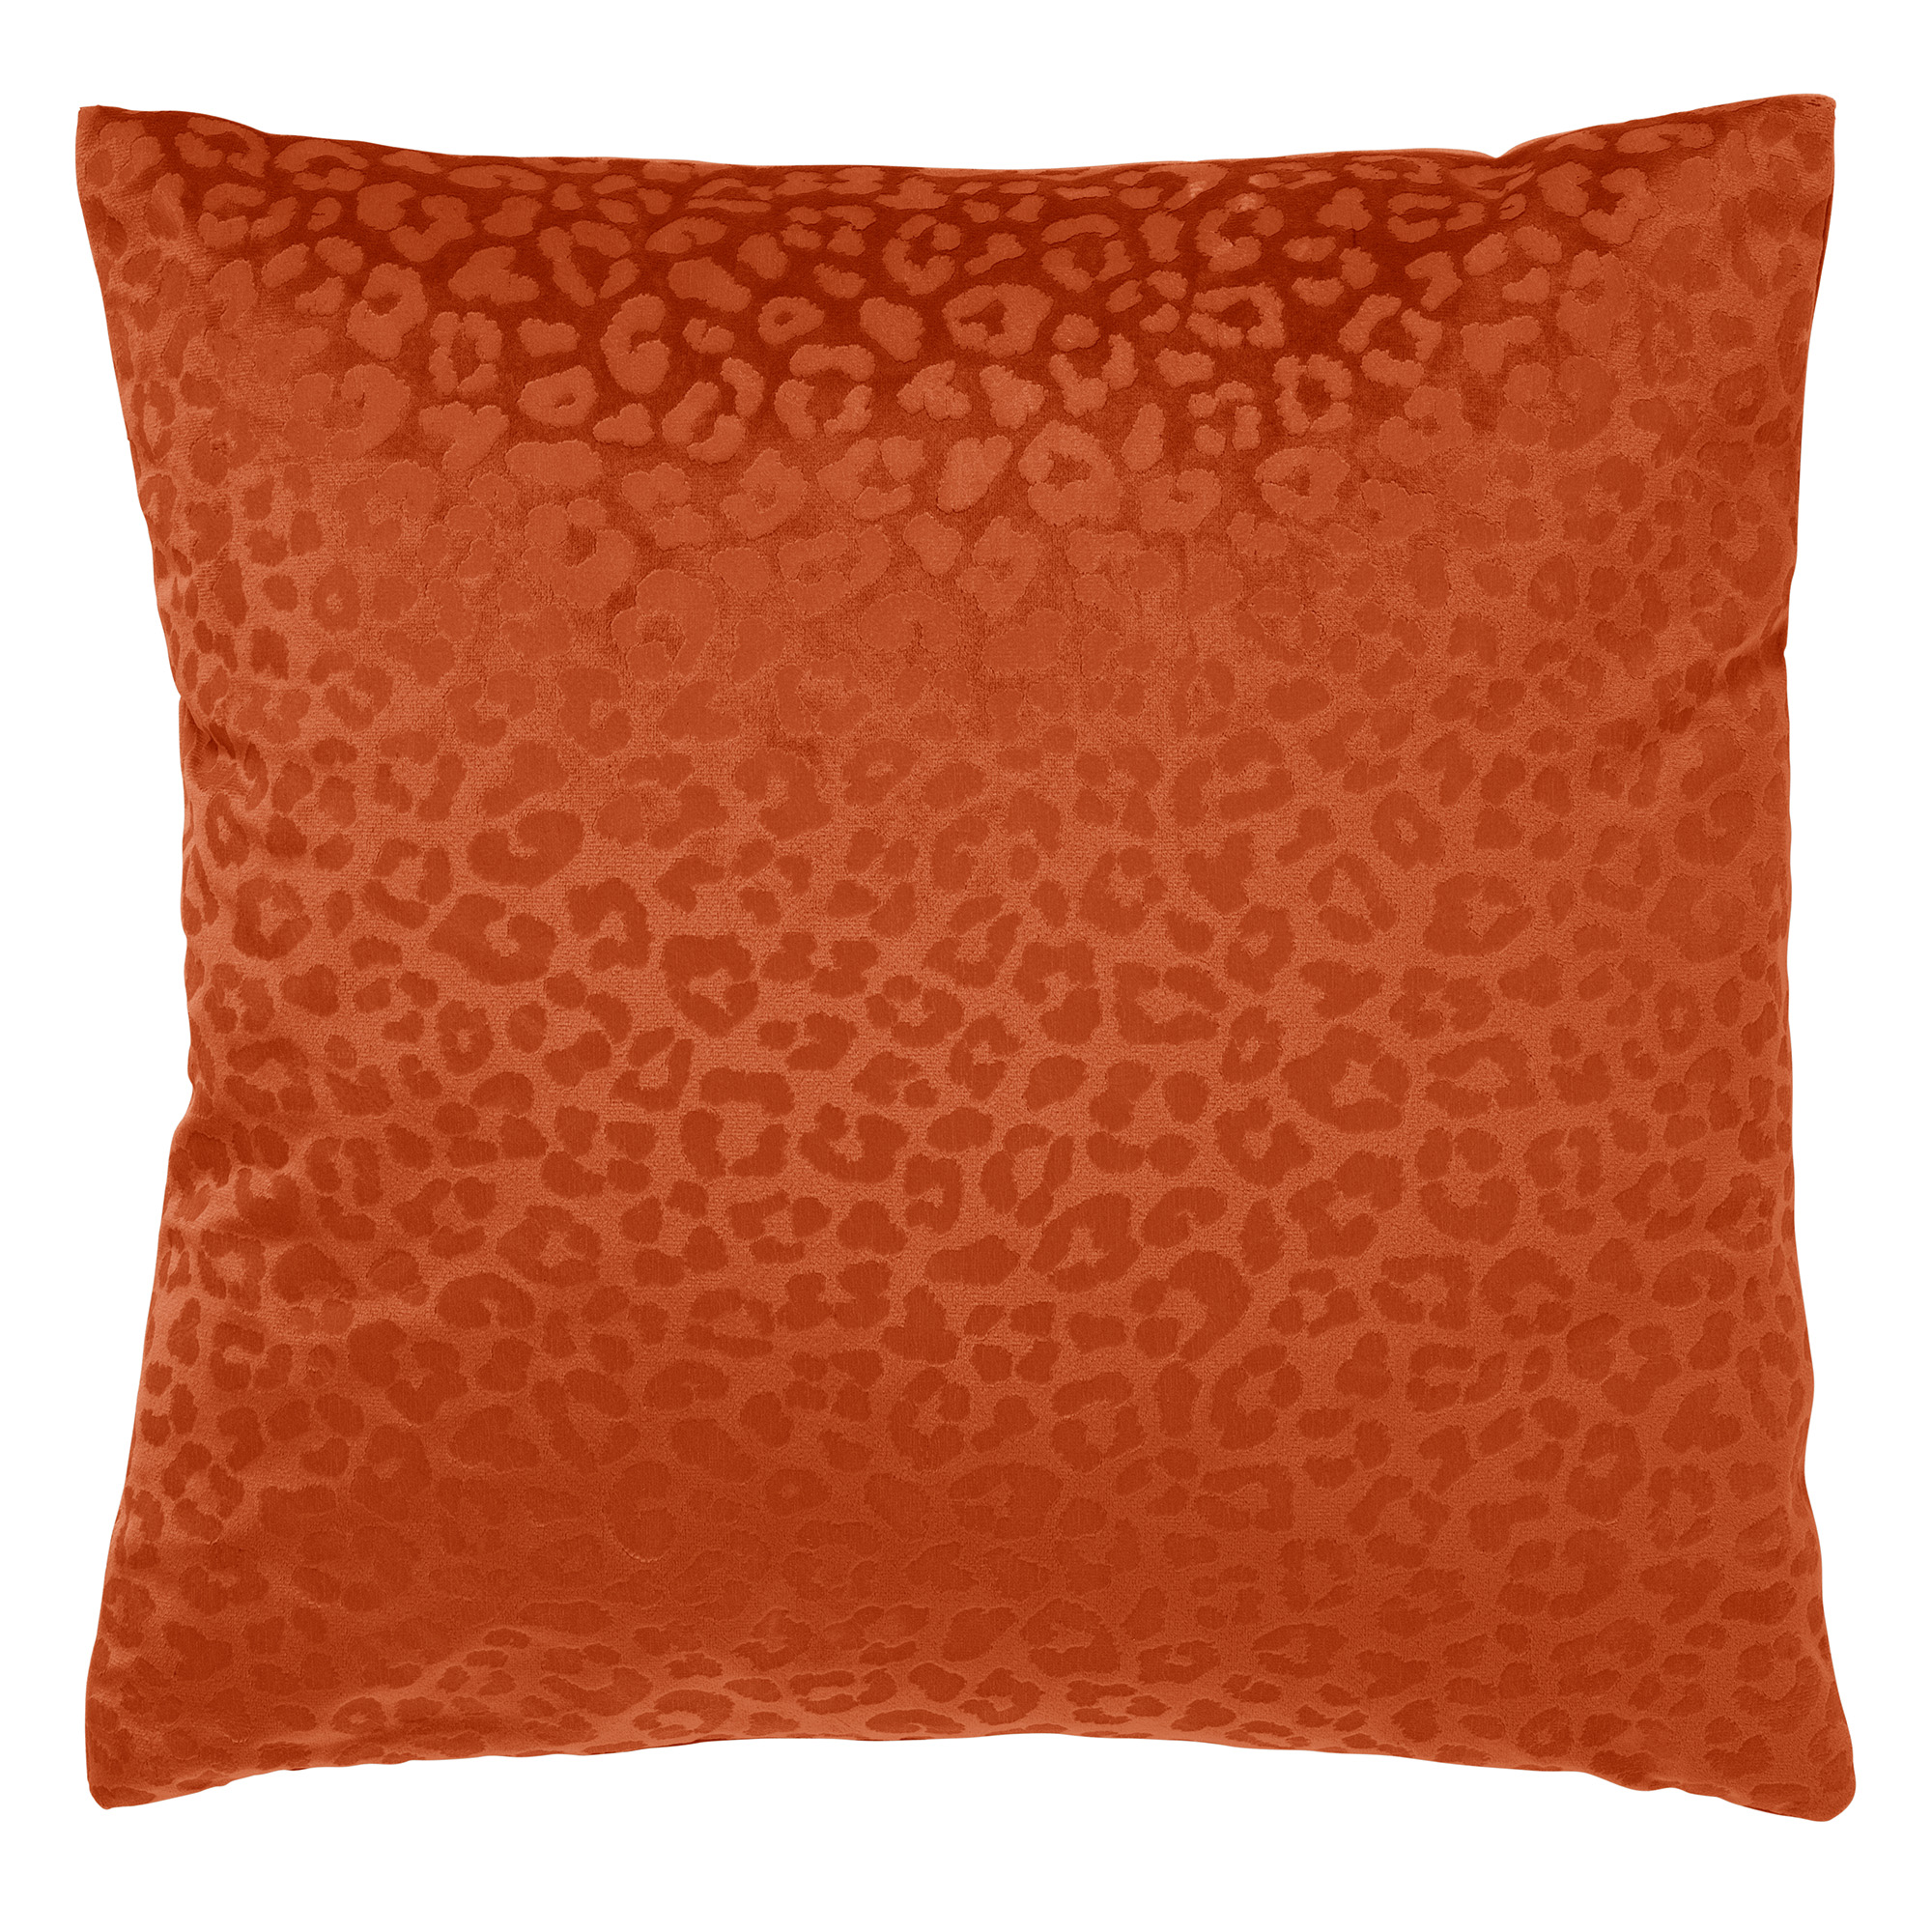 CHESSY - Cushion with animal print 45x45 cm Potters Clay